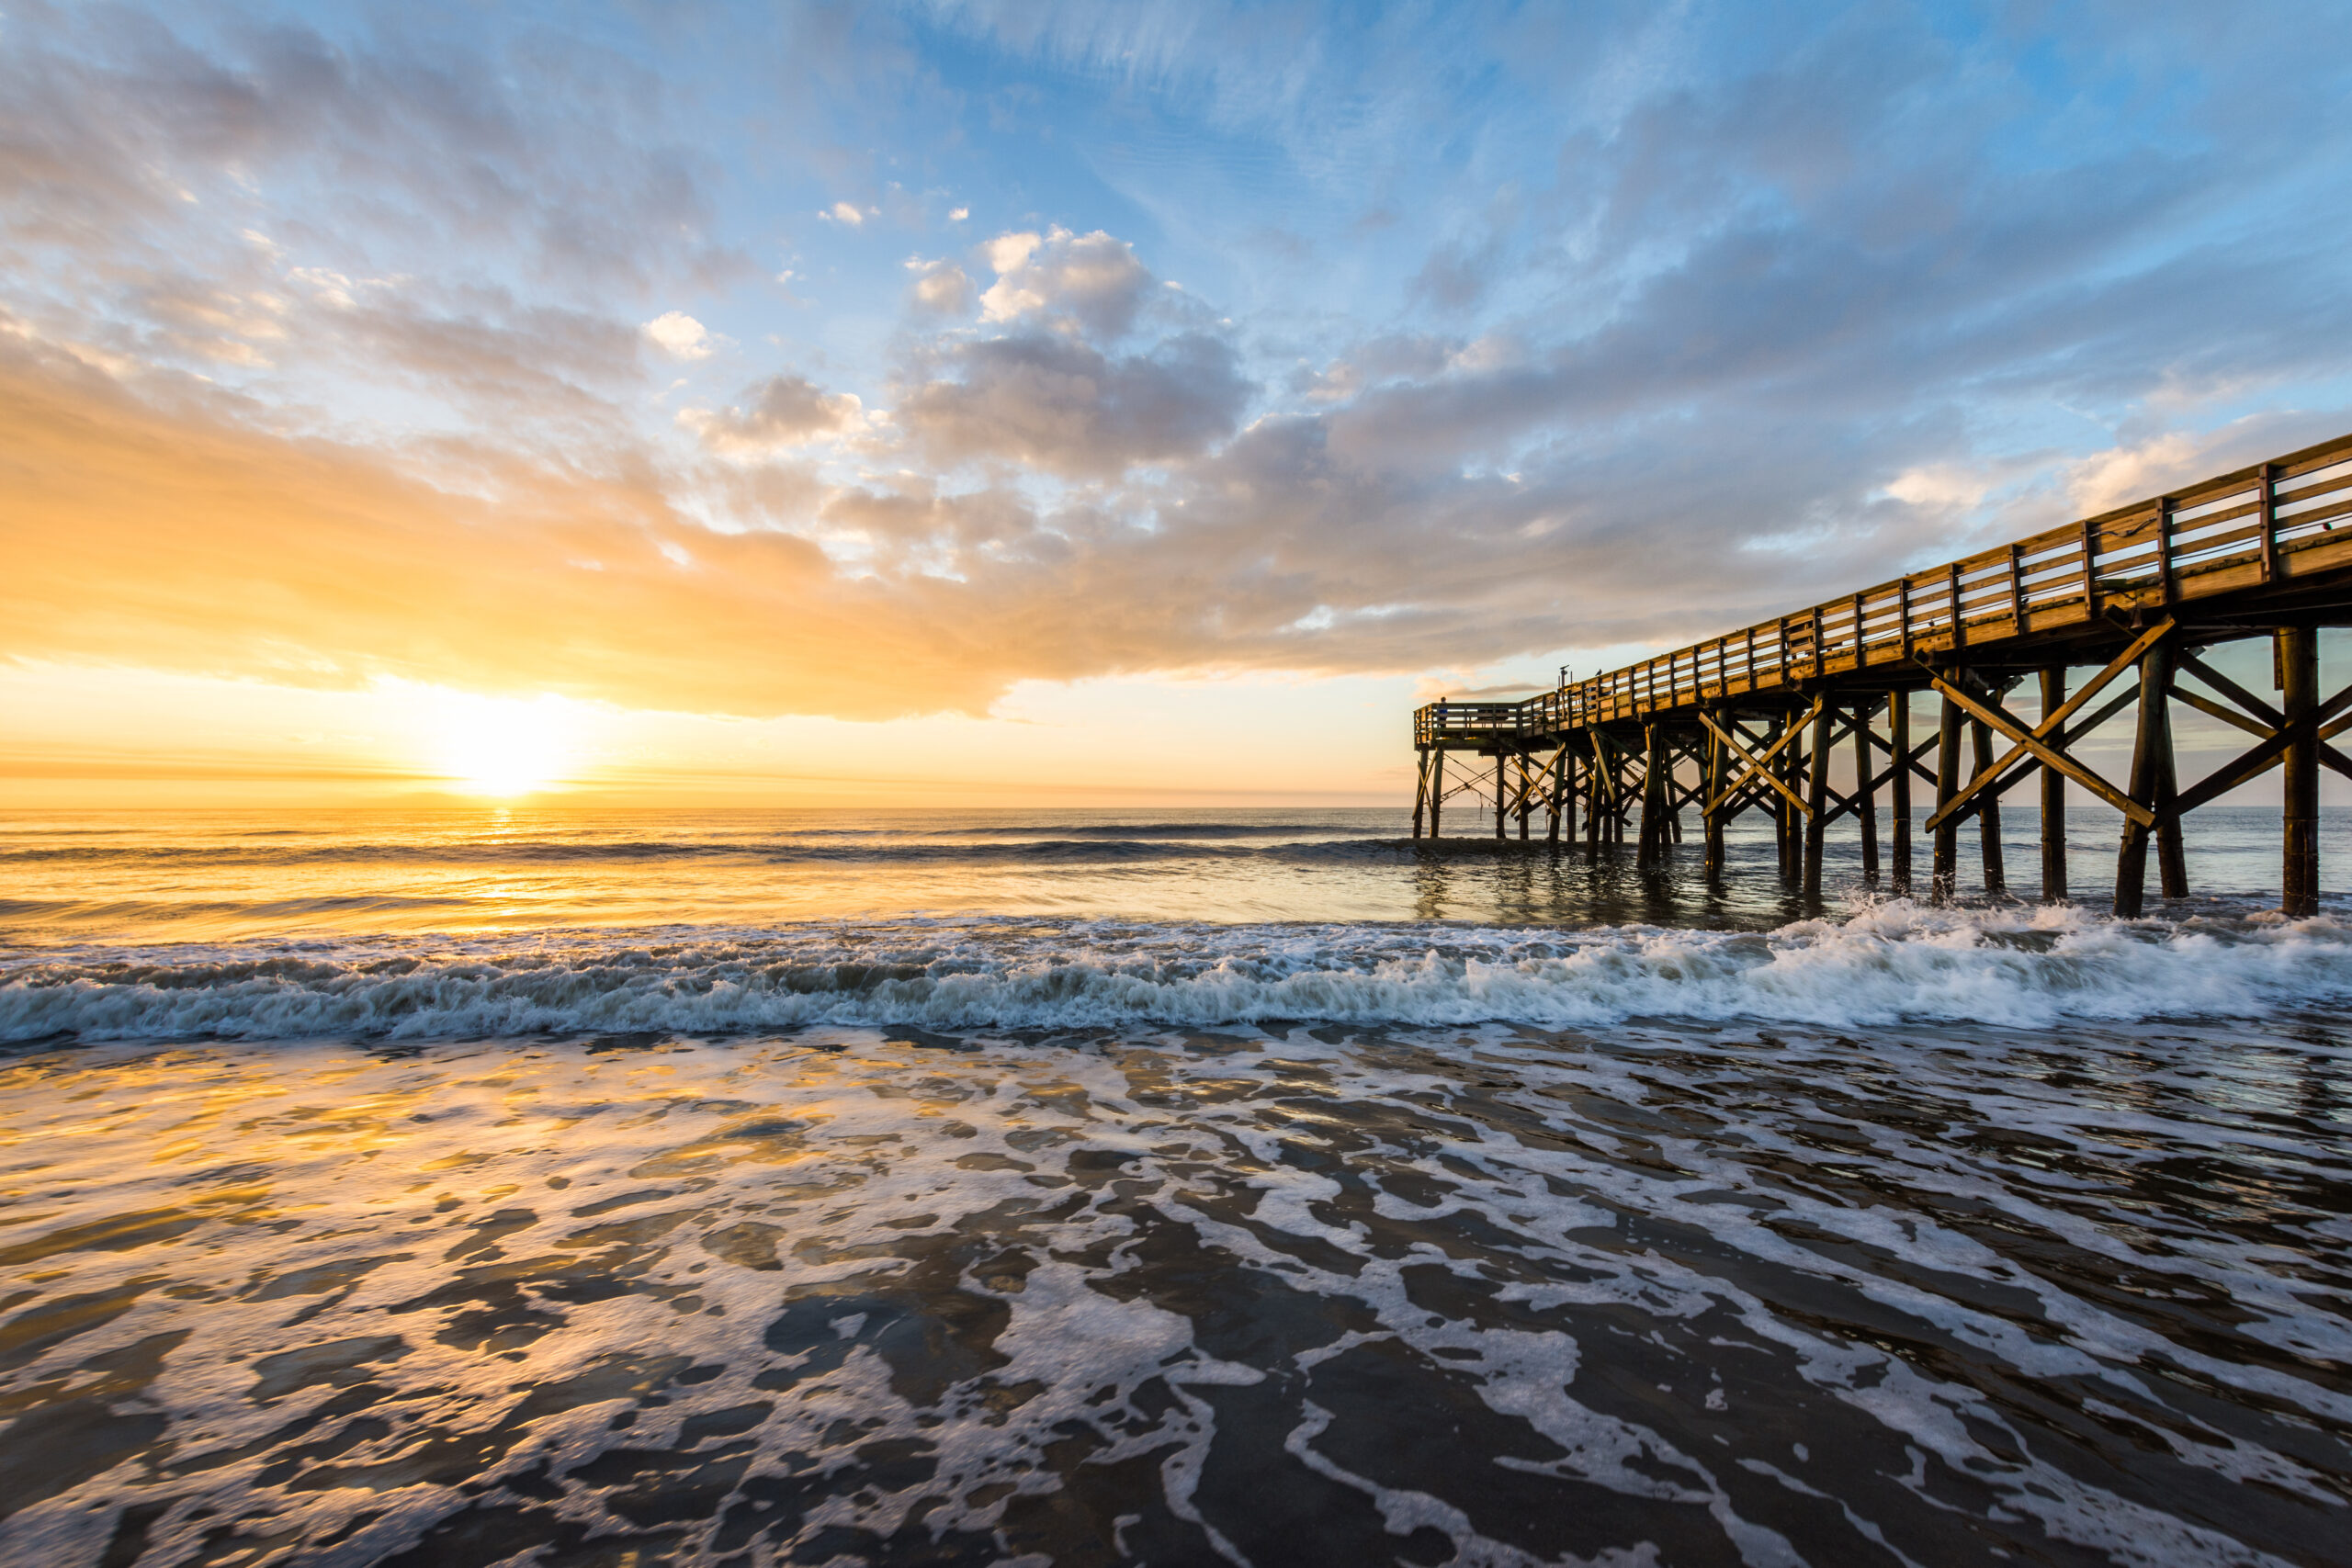 READ MORE ABOUT THE ARTICLE ISLE OF PALMS VACATION GUIDE: THINGS TO DO